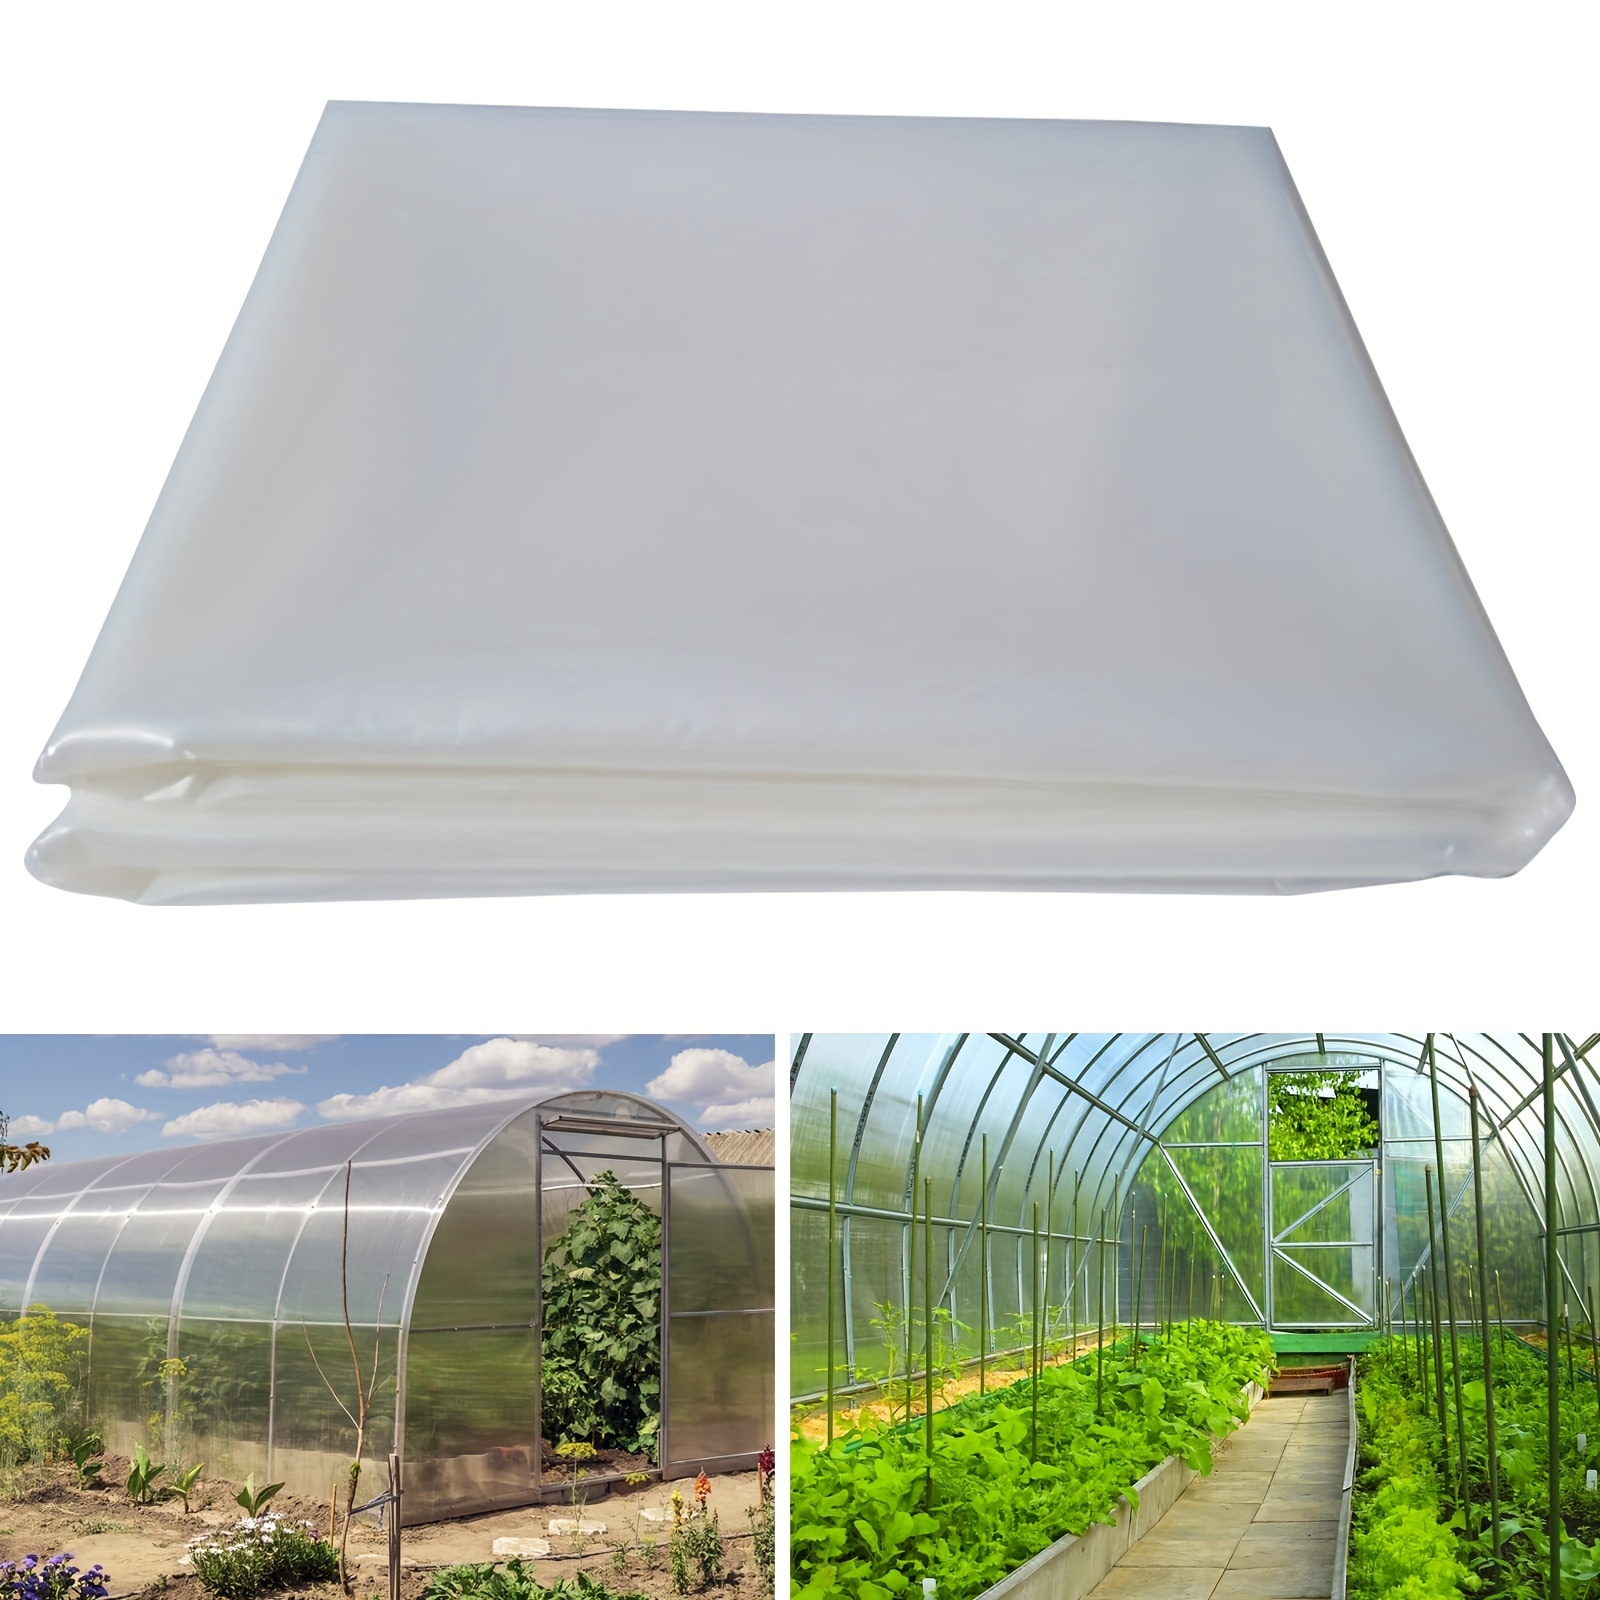  Farm Plastic Supply - Clear Greenhouse Plastic Sheeting - Ultra  Durable - 8 mil - (13' x 10') - 4 Year UV Resistant Polyethylene Greenhouse  Film for Gardening, Farming, Agriculture : Patio, Lawn & Garden